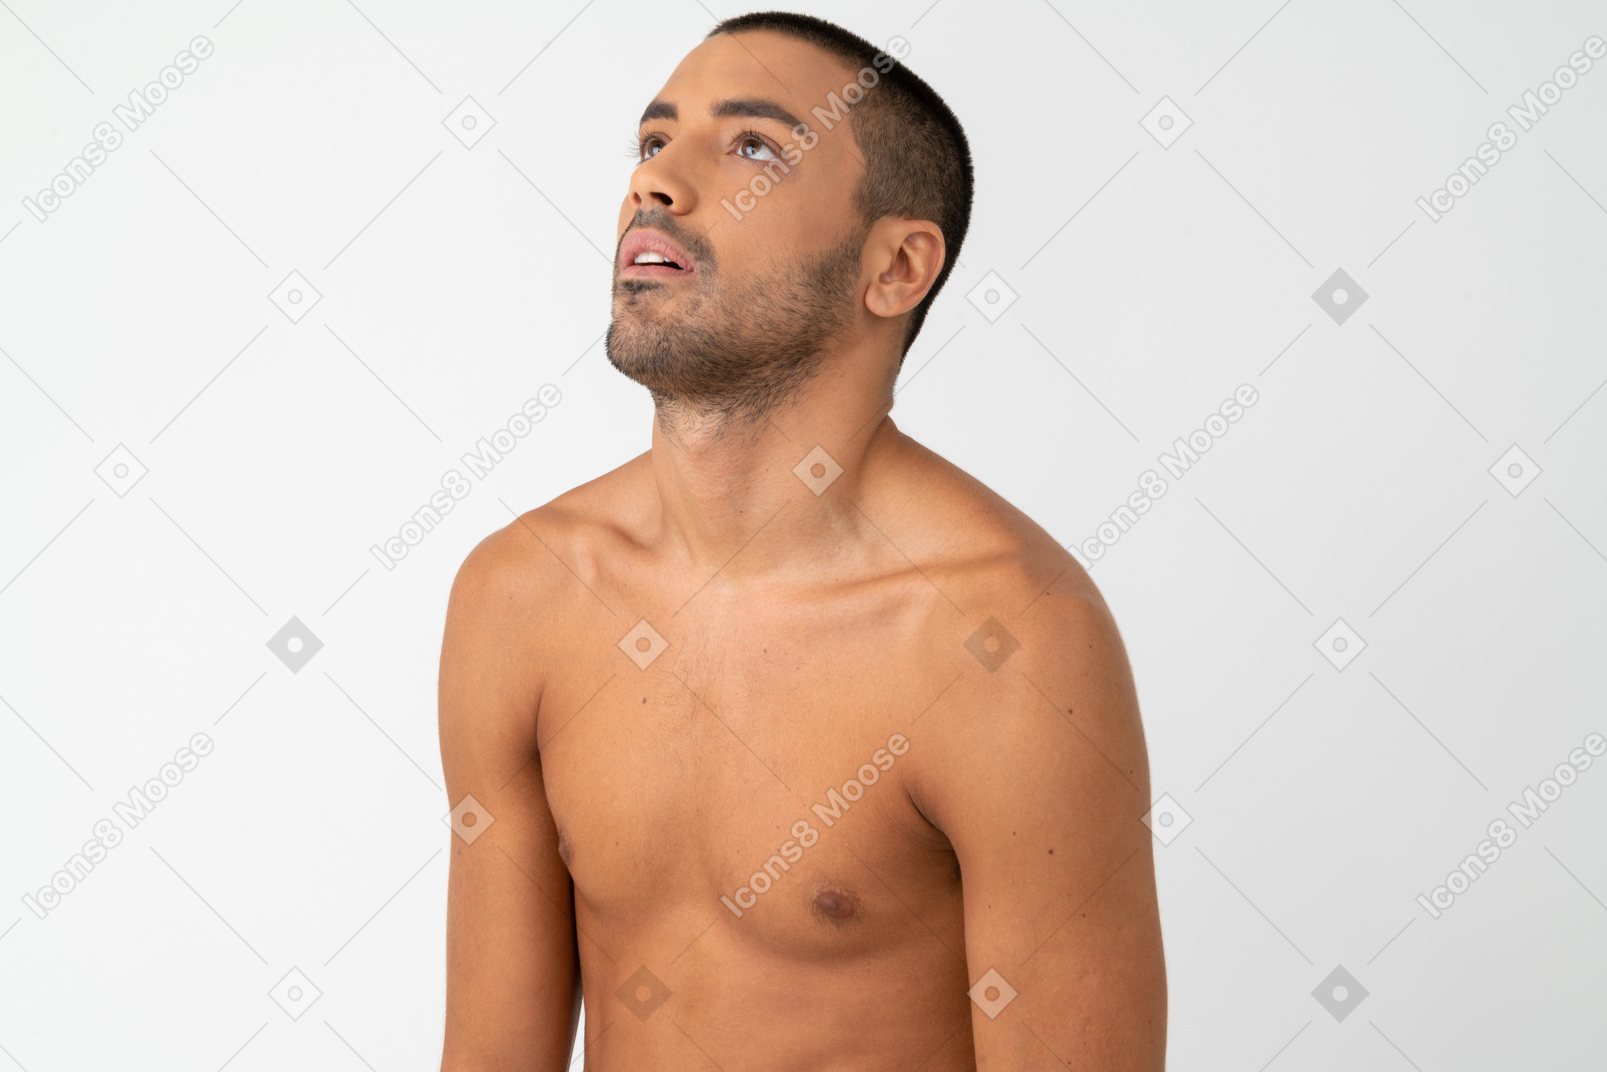 Barechested young male with 'sick of' facial expression